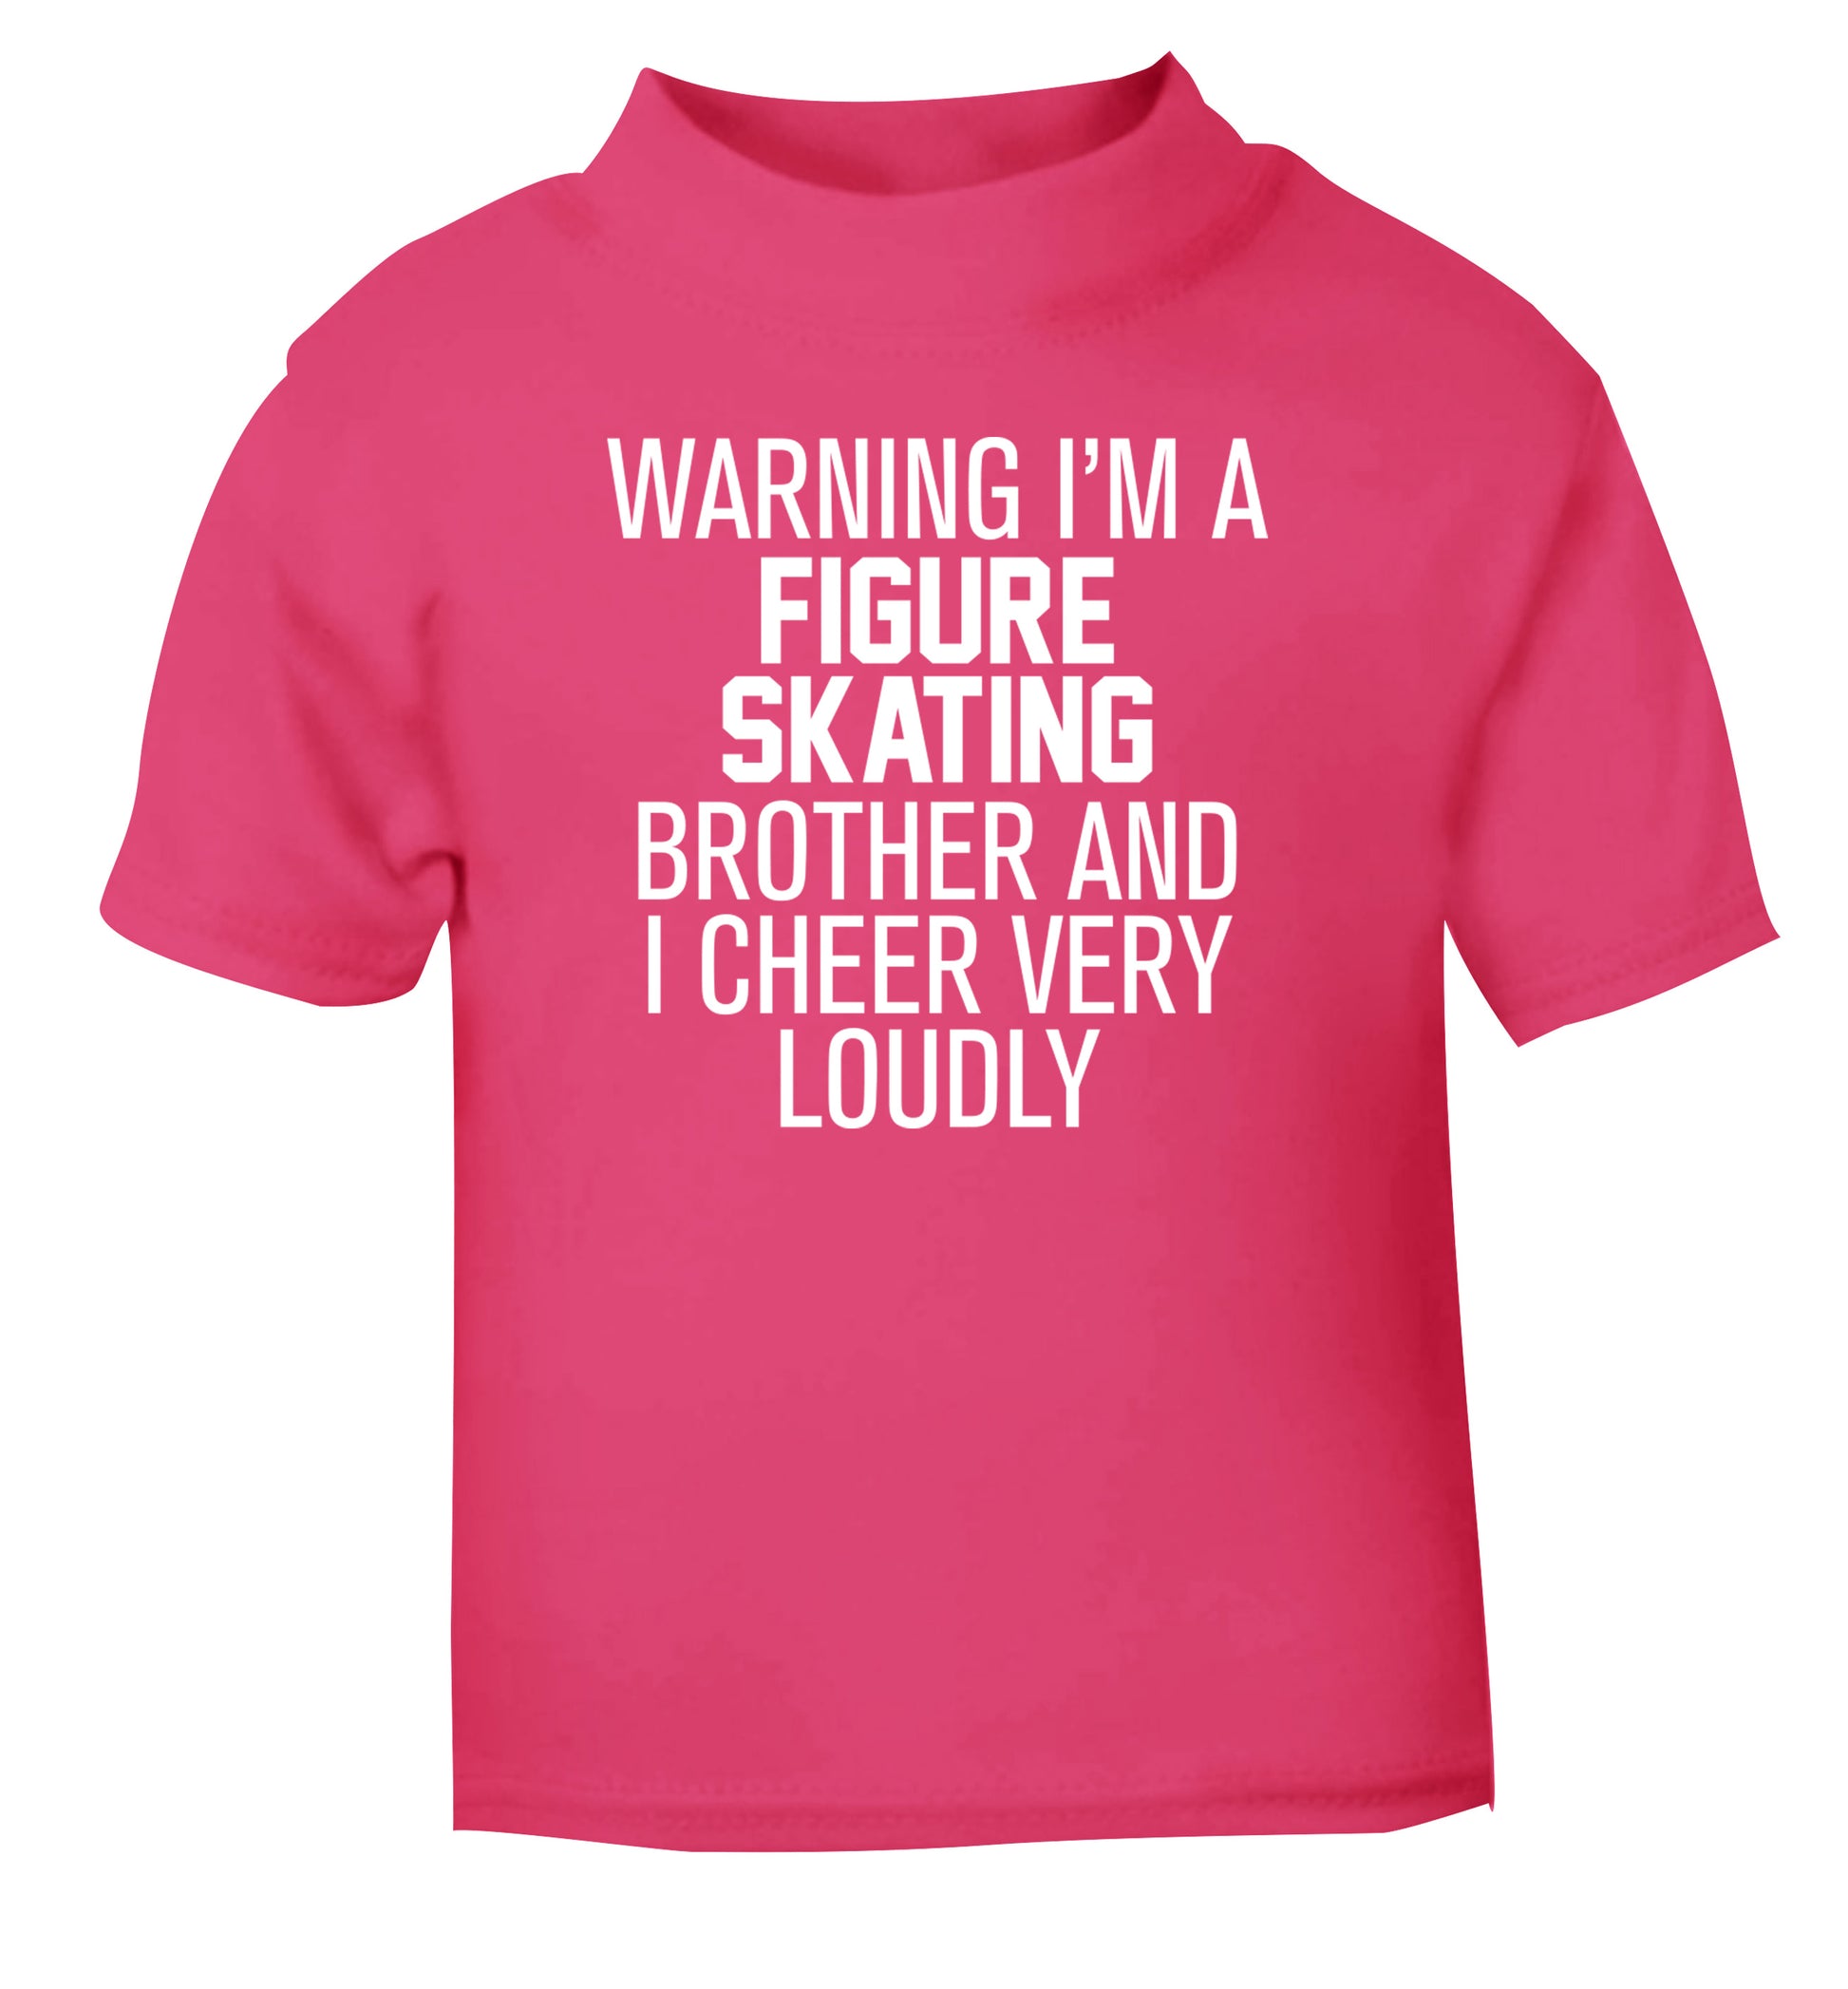 Warning I'm a figure skating brother and I cheer very loudly pink Baby Toddler Tshirt 2 Years